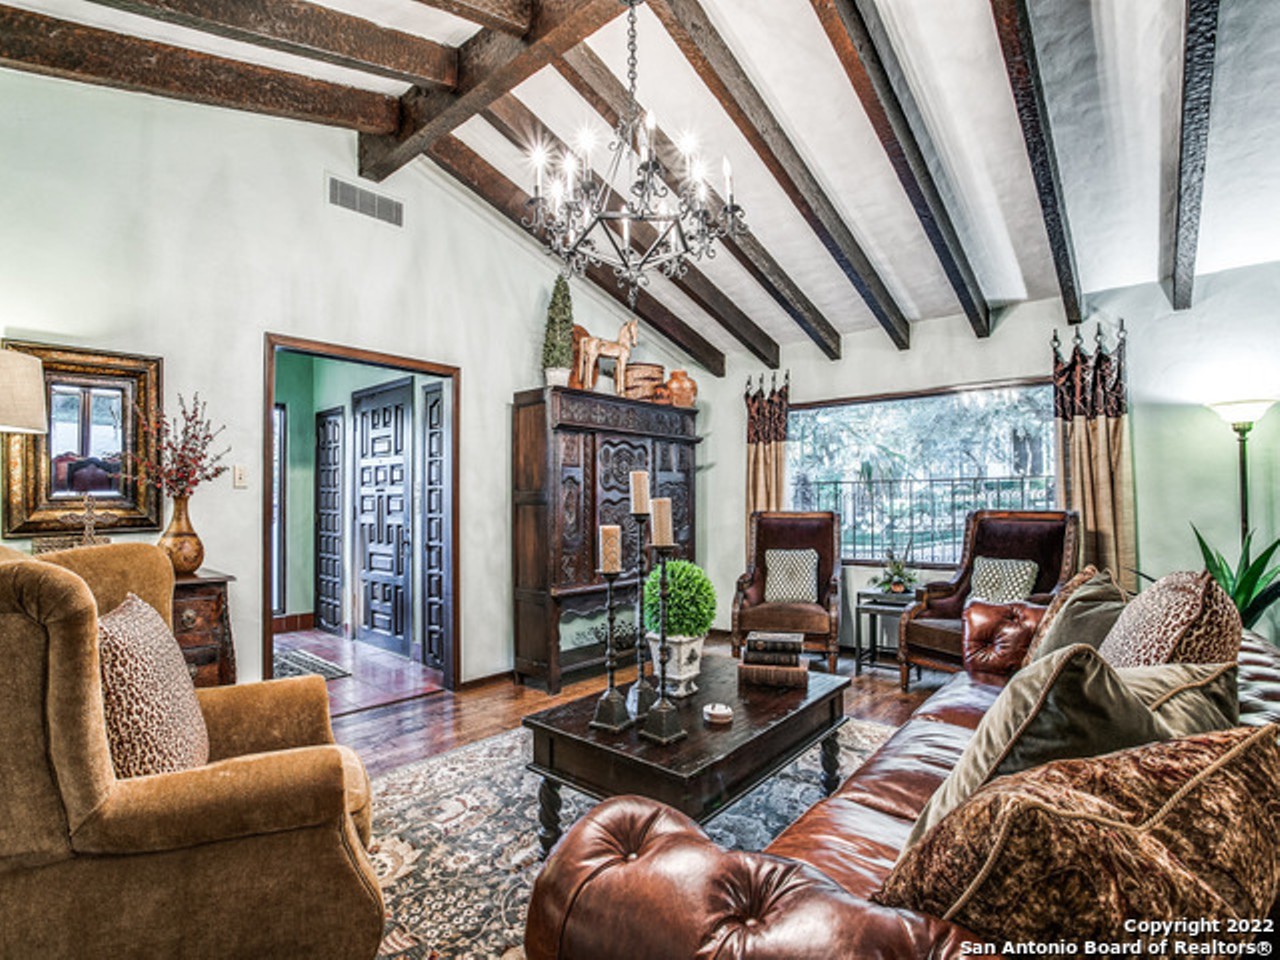 A Spanish-style home for sale in San Antonio is full of mermaid carvings and fountains